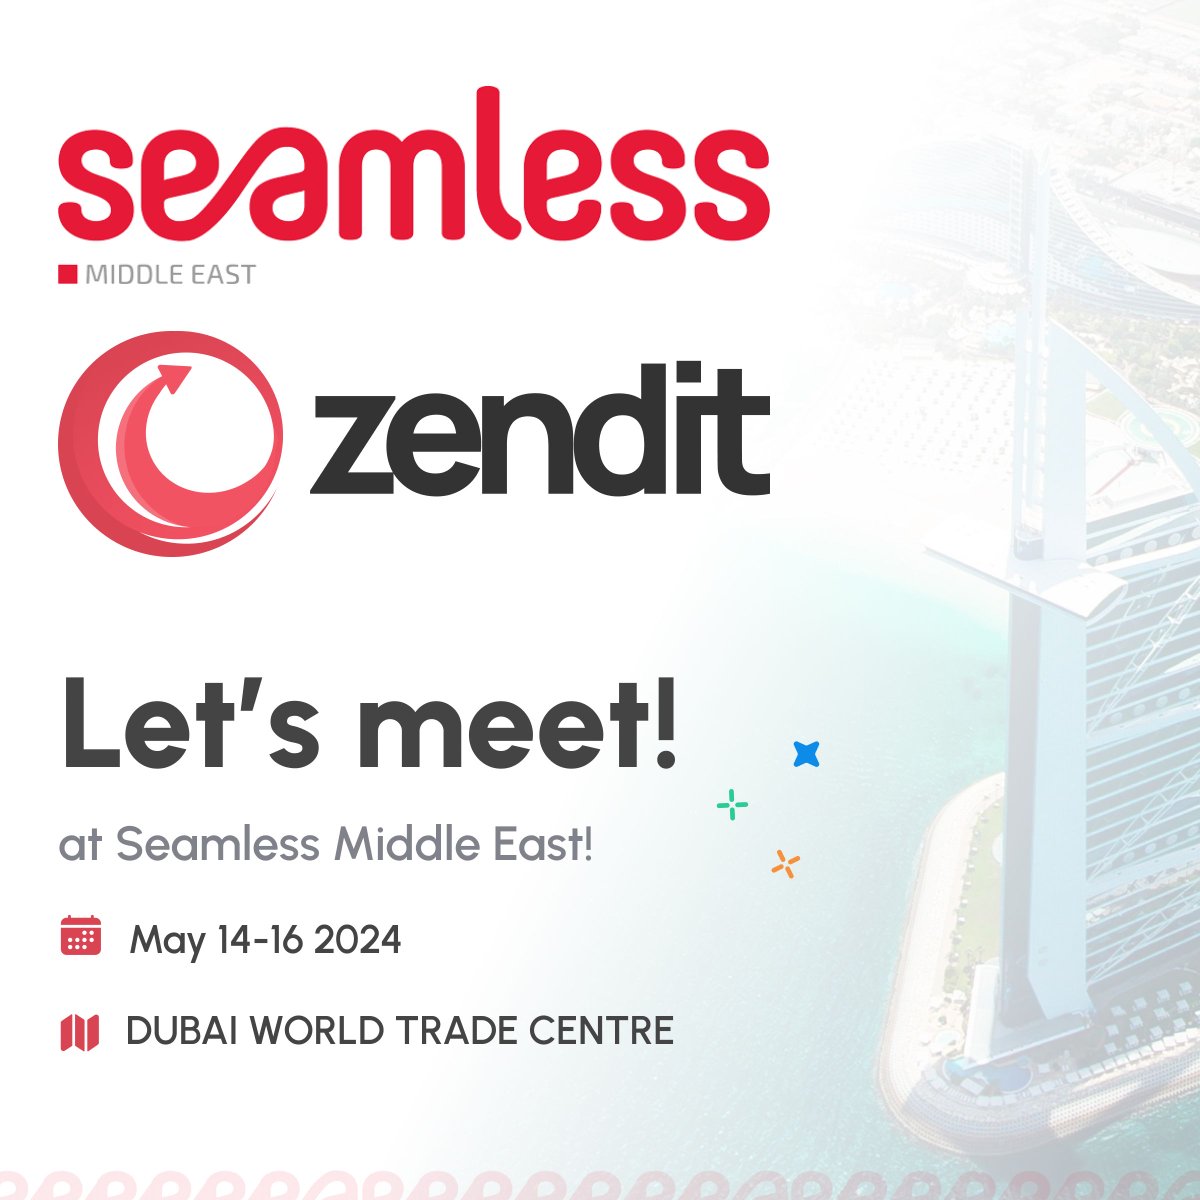 We are thrilled to announce that we'll be at the Seamless event in Dubai World Trade Centre from May 14-16.
Join us for 3 days of innovation, networking, and insights into the future of payments. Send us an email at hello@zendit.io and let`s meet!

#Seamless2024 #SeamlessDubai